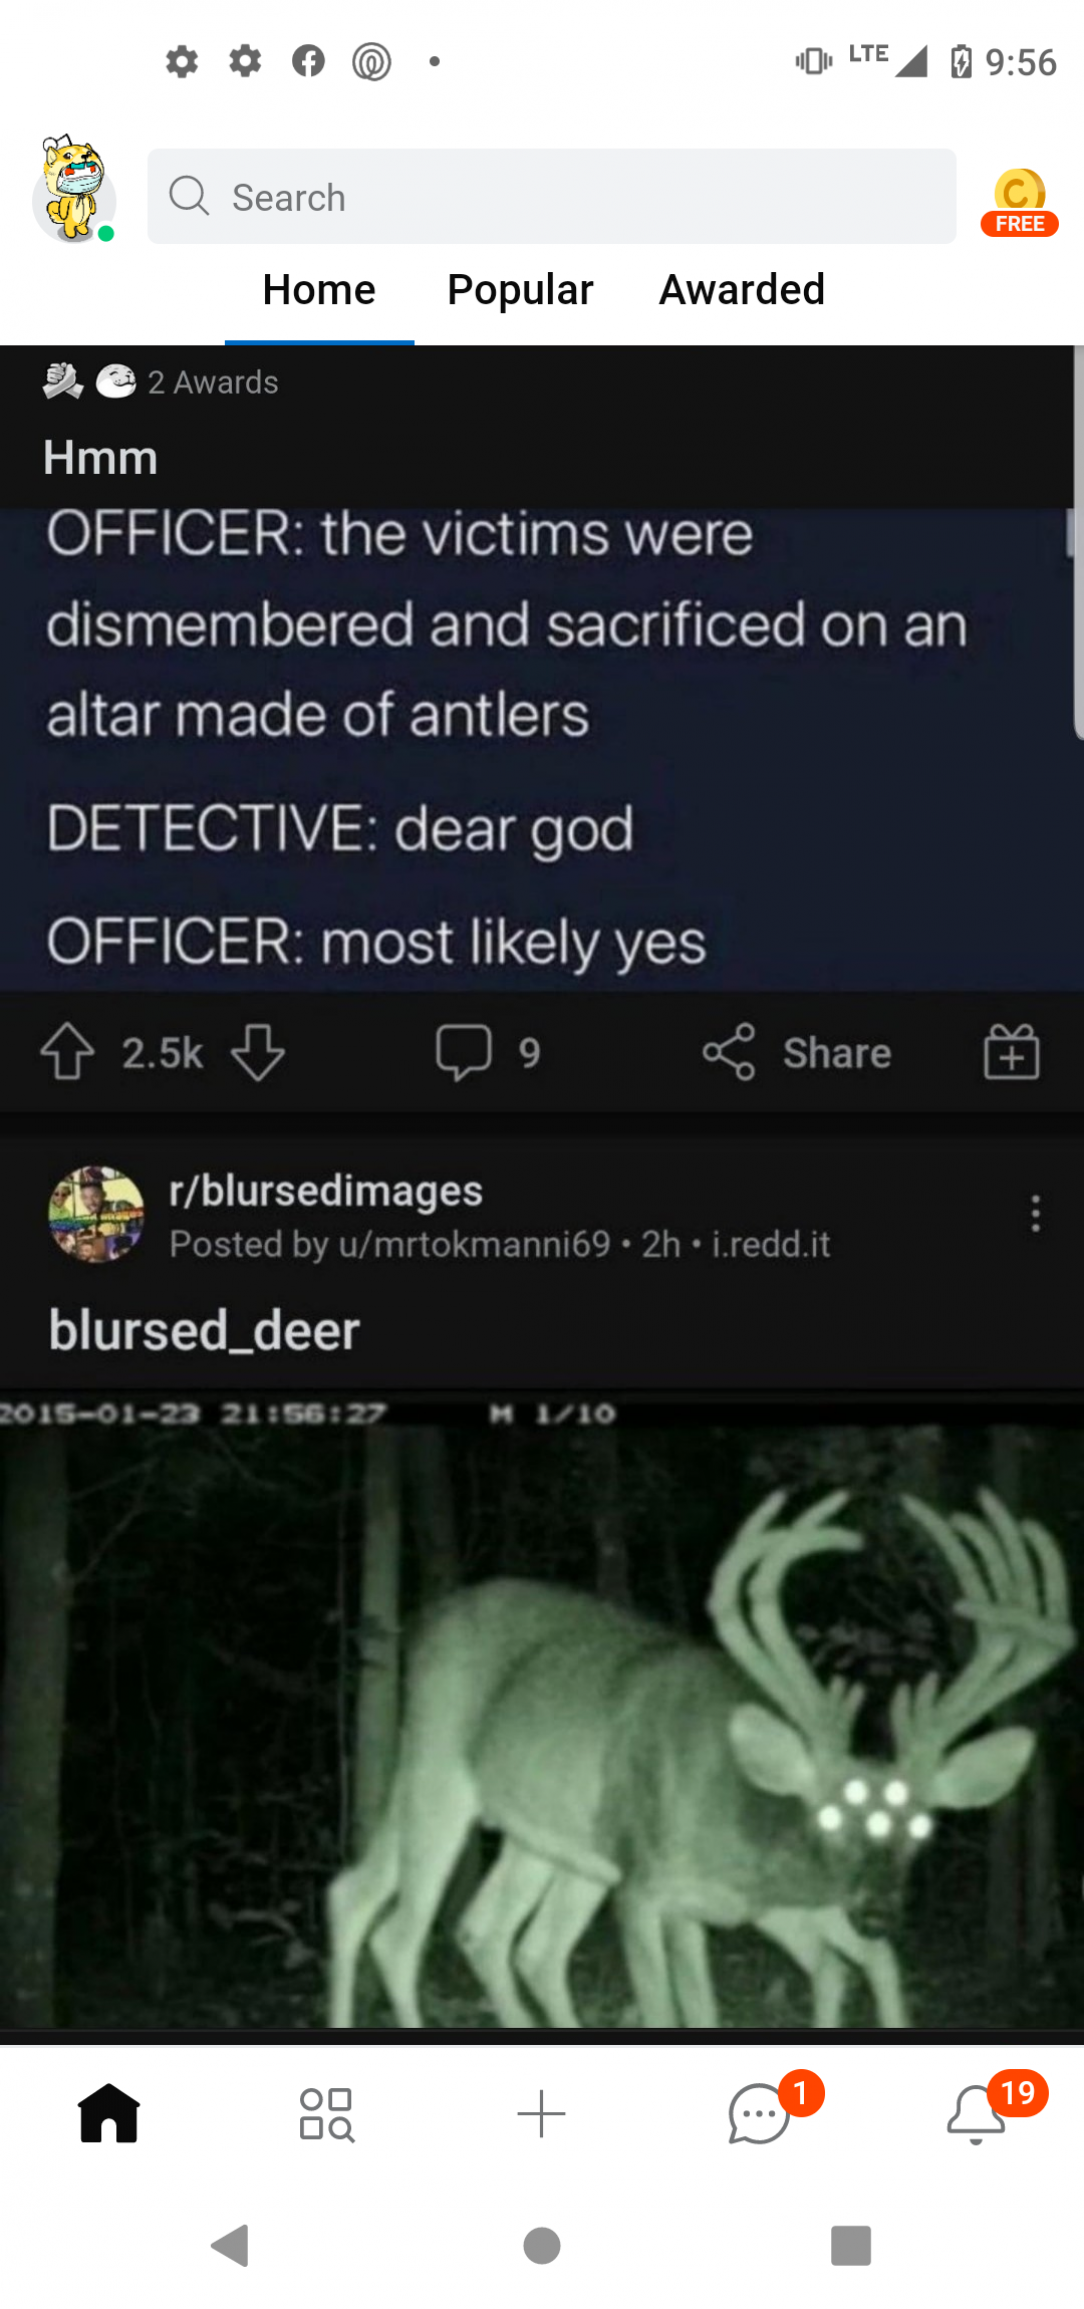 Lord deer, the godly coincidence